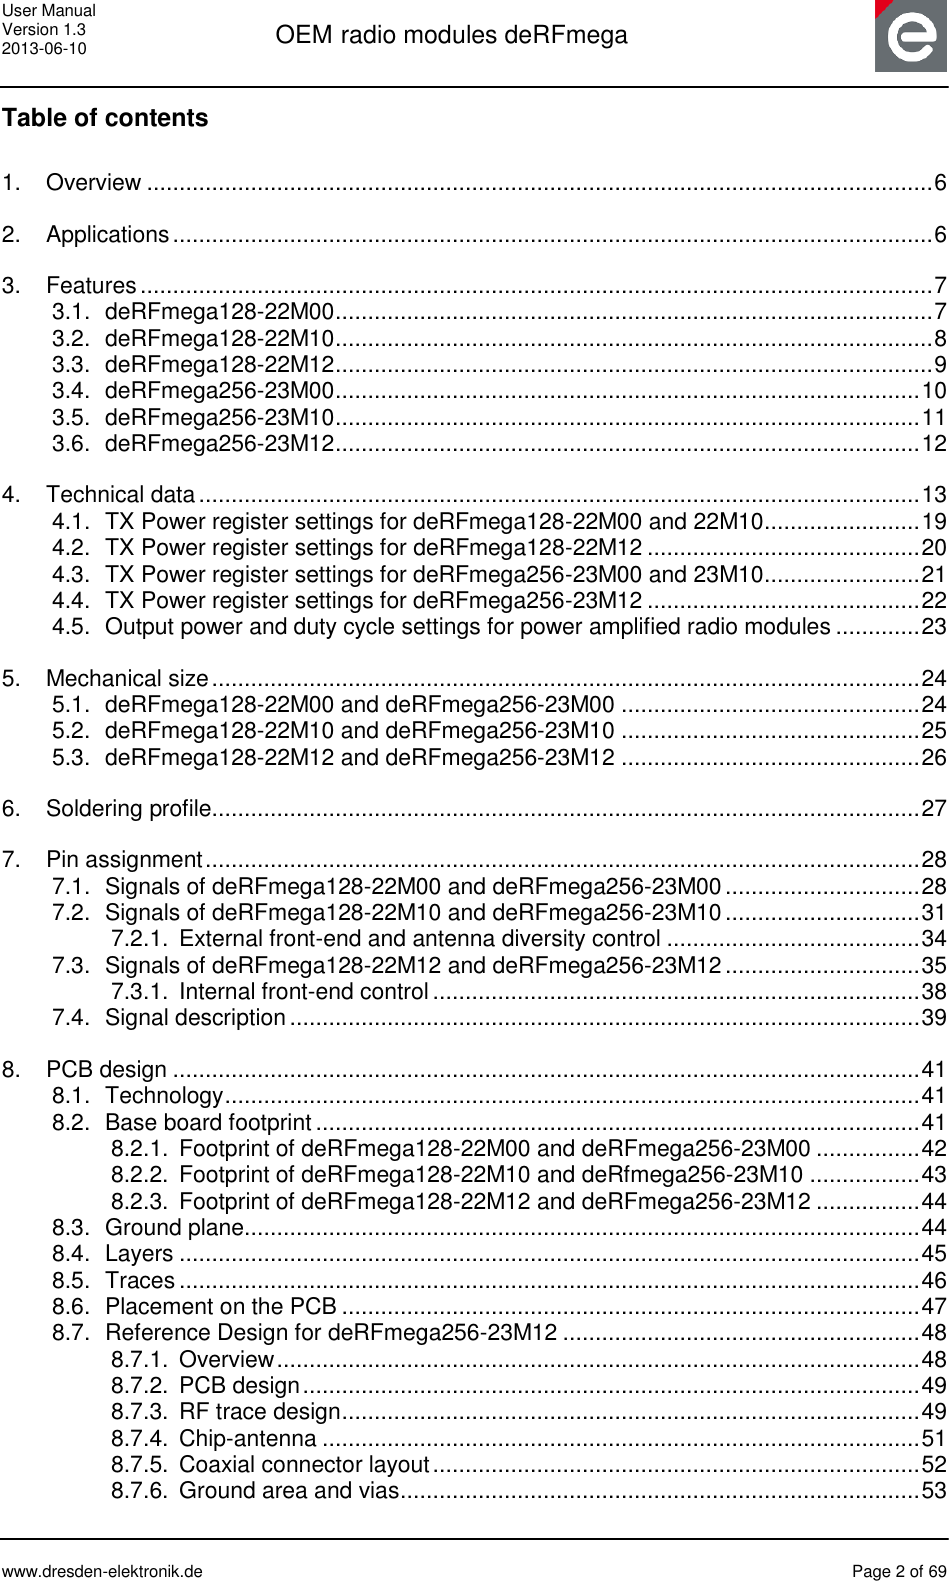 User Manual Version 1.3 2013-06-10  OEM radio modules deRFmega      www.dresden-elektronik.de  Page 2 of 69  Table of contents 1. Overview ......................................................................................................................... 6 2. Applications ..................................................................................................................... 6 3. Features .......................................................................................................................... 7 3.1. deRFmega128-22M00 ............................................................................................ 7 3.2. deRFmega128-22M10 ............................................................................................ 8 3.3. deRFmega128-22M12 ............................................................................................ 9 3.4. deRFmega256-23M00 .......................................................................................... 10 3.5. deRFmega256-23M10 .......................................................................................... 11 3.6. deRFmega256-23M12 .......................................................................................... 12 4. Technical data ............................................................................................................... 13 4.1. TX Power register settings for deRFmega128-22M00 and 22M10 ........................ 19 4.2. TX Power register settings for deRFmega128-22M12 .......................................... 20 4.3. TX Power register settings for deRFmega256-23M00 and 23M10 ........................ 21 4.4. TX Power register settings for deRFmega256-23M12 .......................................... 22 4.5. Output power and duty cycle settings for power amplified radio modules ............. 23 5. Mechanical size ............................................................................................................. 24 5.1. deRFmega128-22M00 and deRFmega256-23M00 .............................................. 24 5.2. deRFmega128-22M10 and deRFmega256-23M10 .............................................. 25 5.3. deRFmega128-22M12 and deRFmega256-23M12 .............................................. 26 6. Soldering profile............................................................................................................. 27 7. Pin assignment .............................................................................................................. 28 7.1. Signals of deRFmega128-22M00 and deRFmega256-23M00 .............................. 28 7.2. Signals of deRFmega128-22M10 and deRFmega256-23M10 .............................. 31 7.2.1. External front-end and antenna diversity control ....................................... 34 7.3. Signals of deRFmega128-22M12 and deRFmega256-23M12 .............................. 35 7.3.1. Internal front-end control ........................................................................... 38 7.4. Signal description ................................................................................................. 39 8. PCB design ................................................................................................................... 41 8.1. Technology ........................................................................................................... 41 8.2. Base board footprint ............................................................................................. 41 8.2.1. Footprint of deRFmega128-22M00 and deRFmega256-23M00 ................ 42 8.2.2. Footprint of deRFmega128-22M10 and deRfmega256-23M10 ................. 43 8.2.3. Footprint of deRFmega128-22M12 and deRFmega256-23M12 ................ 44 8.3. Ground plane........................................................................................................ 44 8.4. Layers .................................................................................................................. 45 8.5. Traces .................................................................................................................. 46 8.6. Placement on the PCB ......................................................................................... 47 8.7. Reference Design for deRFmega256-23M12 ....................................................... 48 8.7.1. Overview ................................................................................................... 48 8.7.2. PCB design ............................................................................................... 49 8.7.3. RF trace design ......................................................................................... 49 8.7.4. Chip-antenna ............................................................................................ 51 8.7.5. Coaxial connector layout ........................................................................... 52 8.7.6. Ground area and vias ................................................................................ 53 